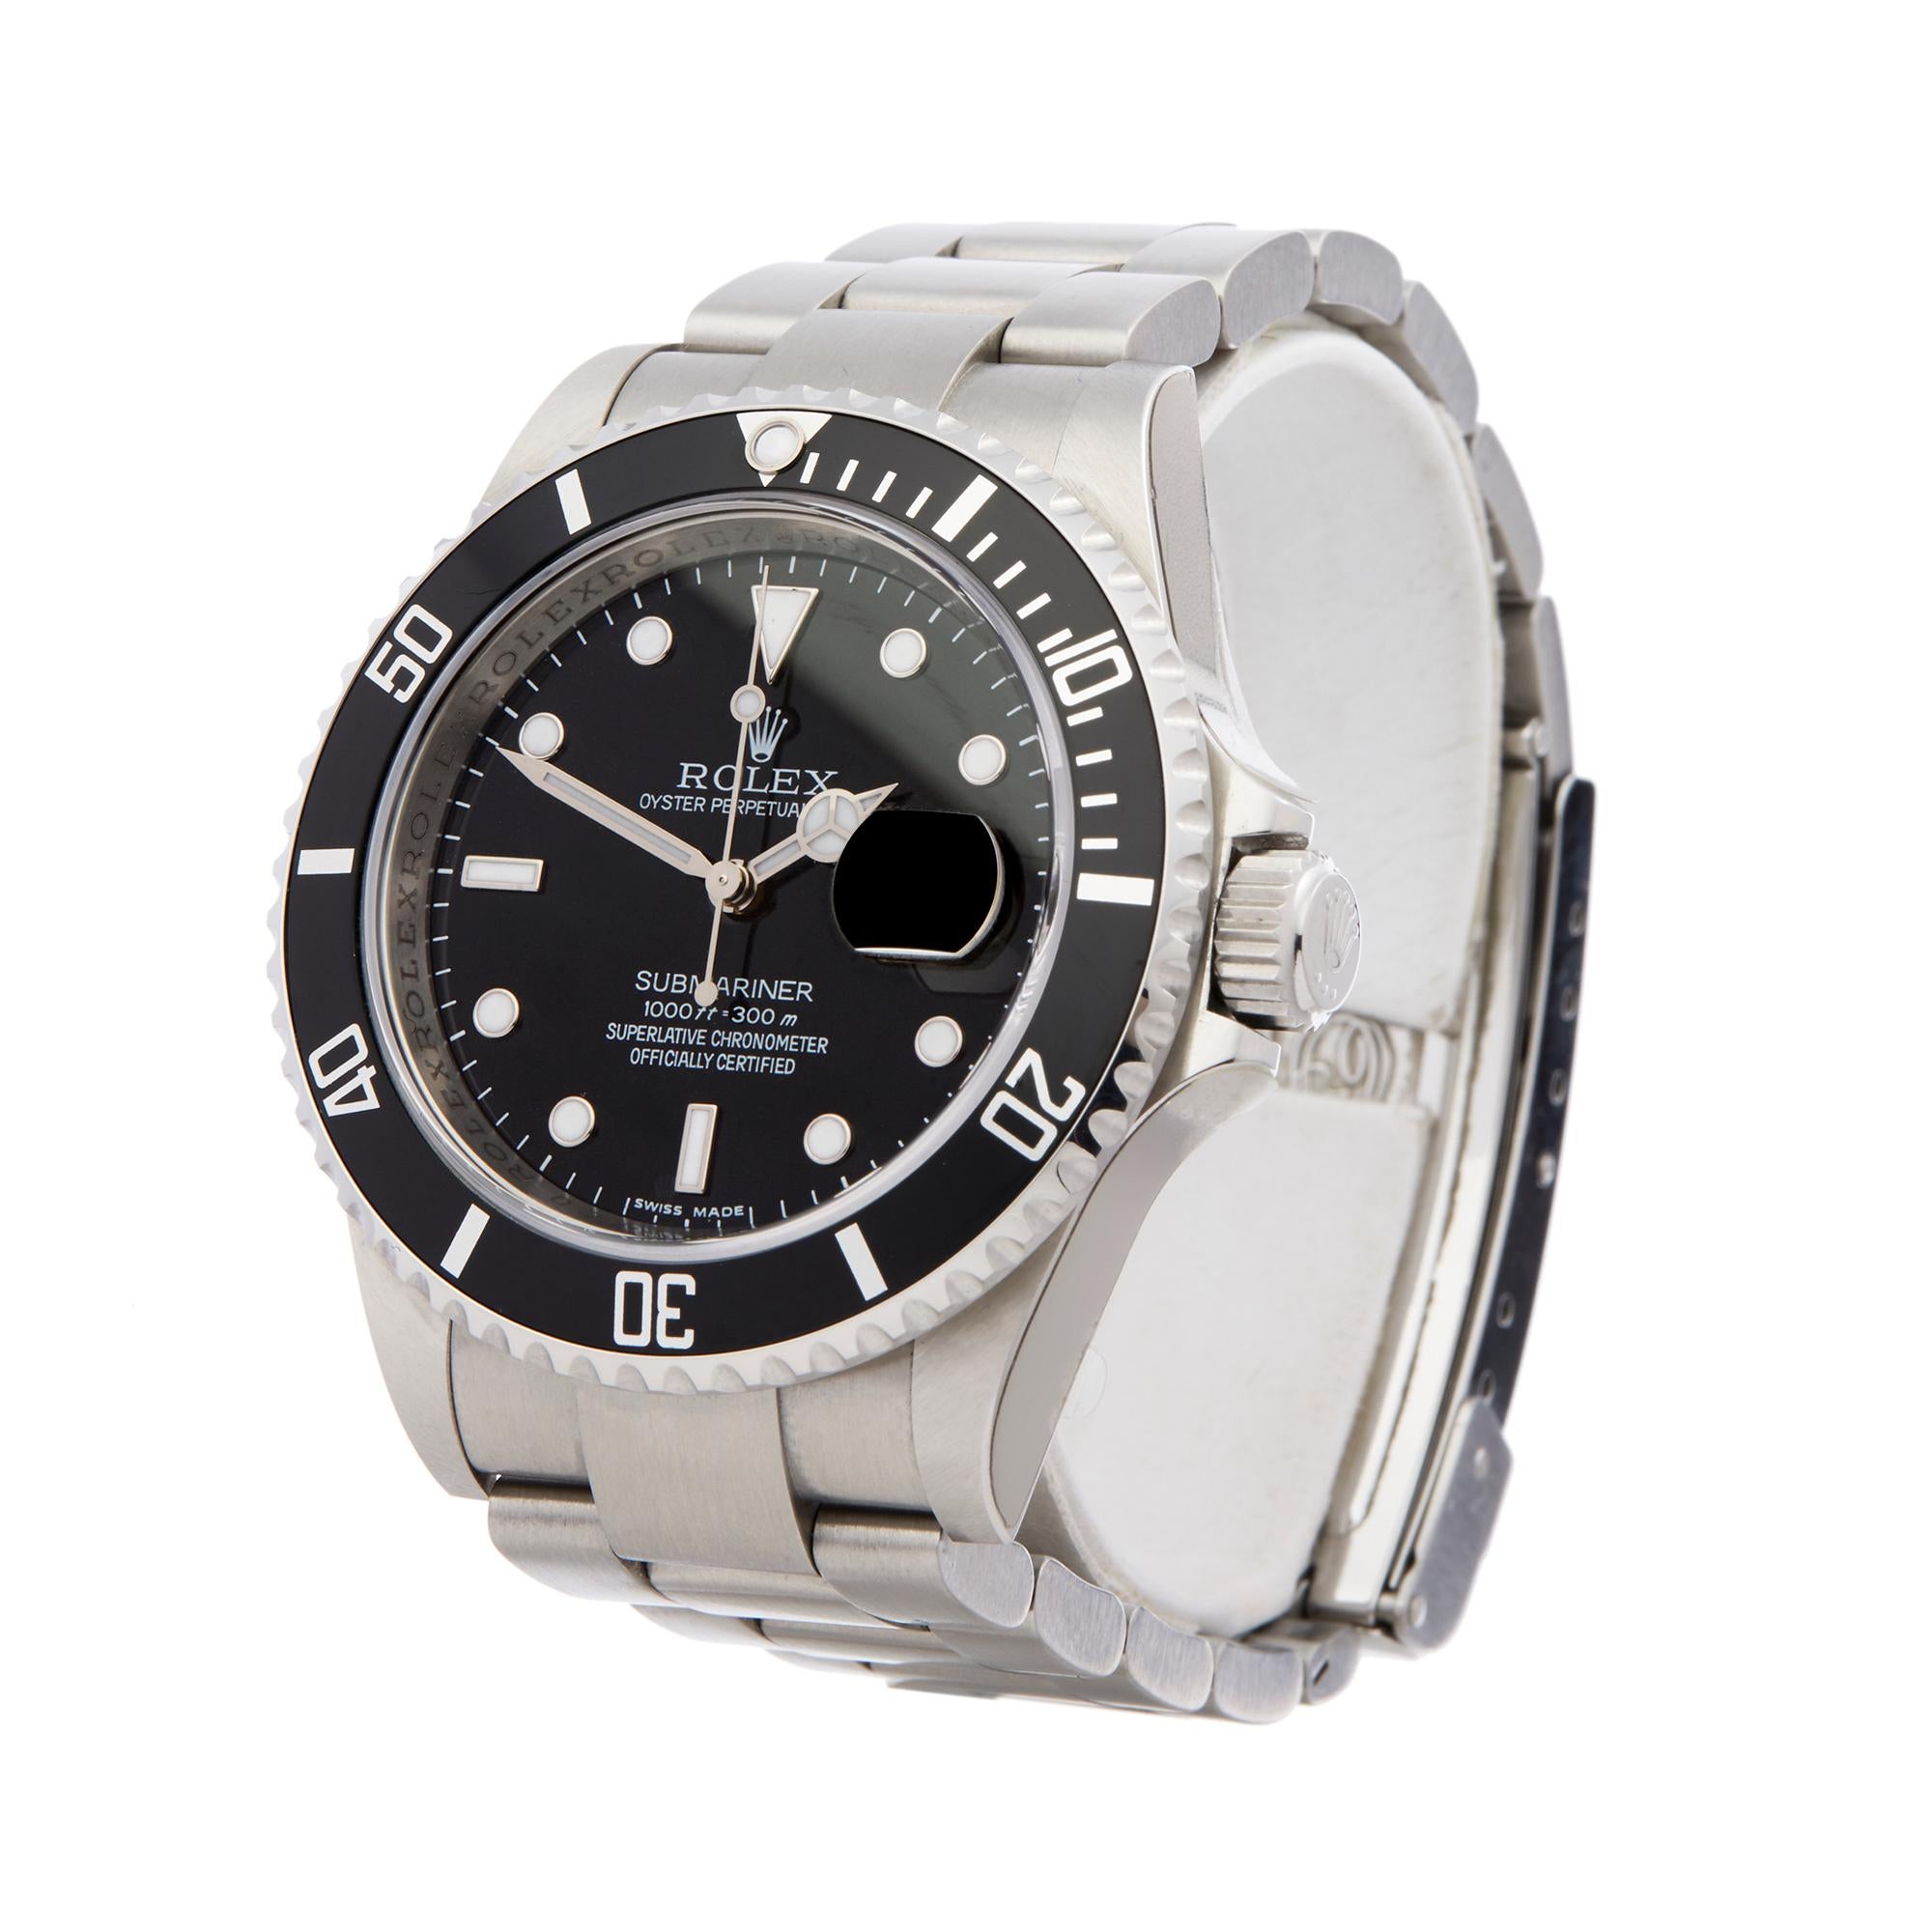 Reference: W6101
Manufacturer: Rolex
Model: Submariner
Model Number: 16610
Age: 8th May 2010
Gender: Men's
Box and Papers: Box, Manuals and Guarantee
Dial: Black
Glass: Sapphire Crystal
Movement: Automatic
Water Resistance: To Manufacturers